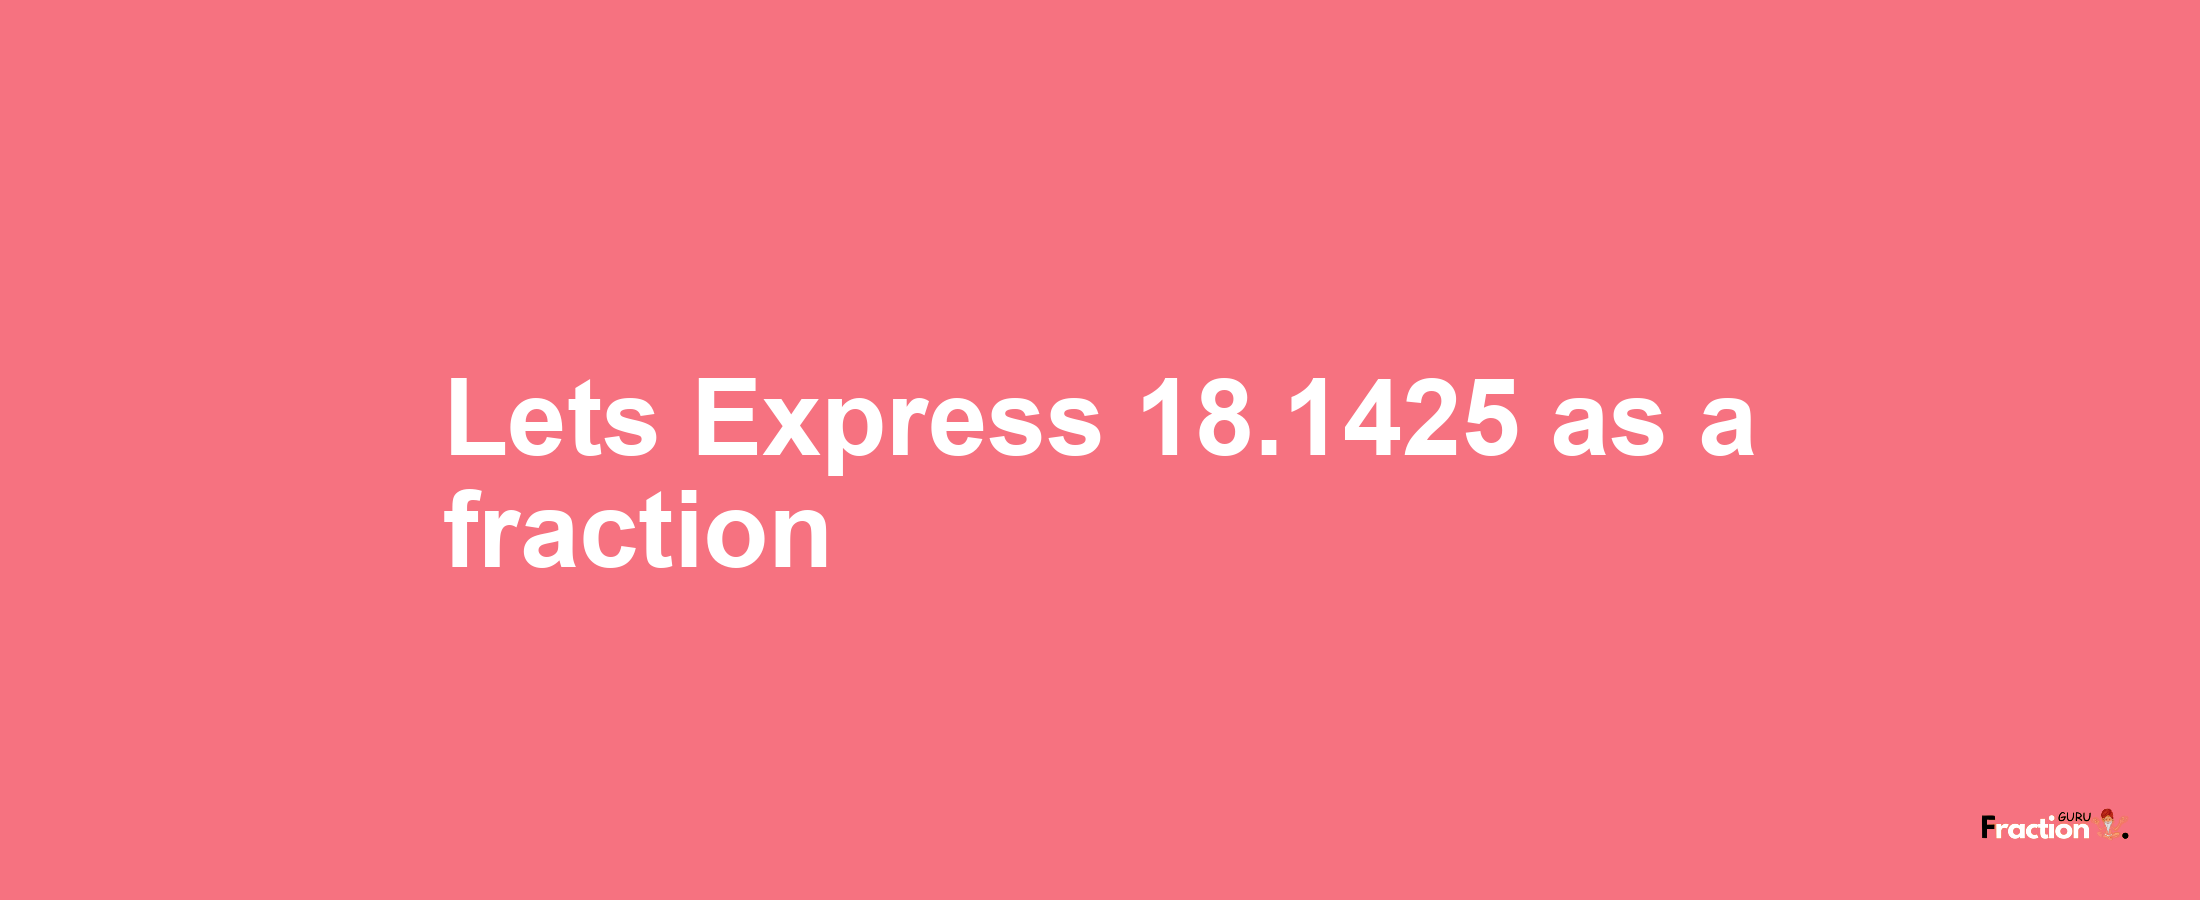 Lets Express 18.1425 as afraction